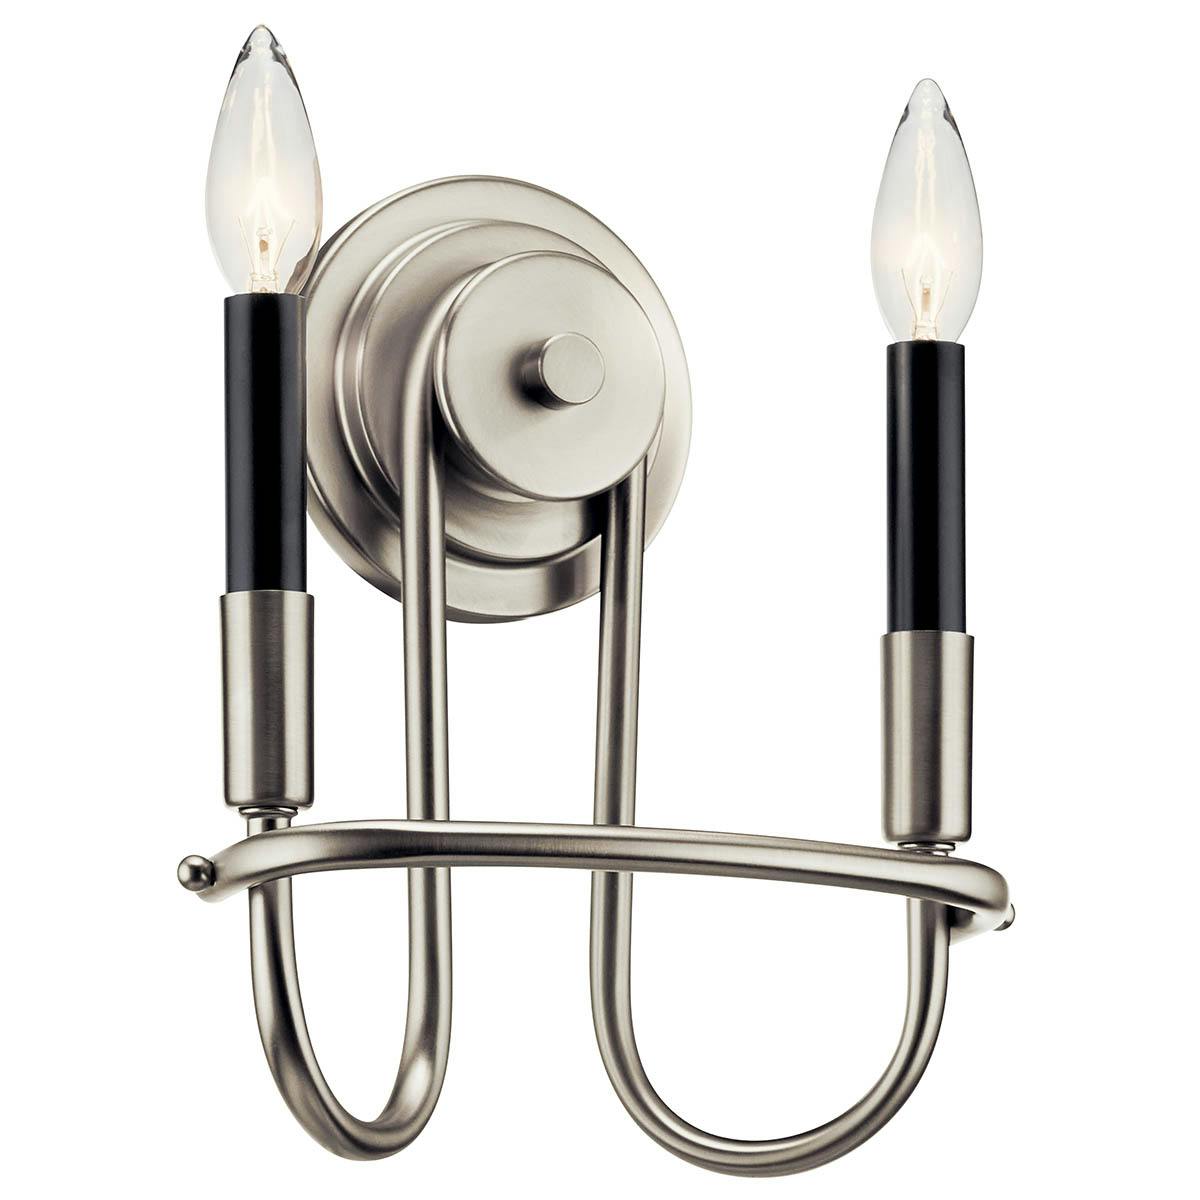 Capitol Hill 10.75" 2 Light Sconce Nickel on a white background